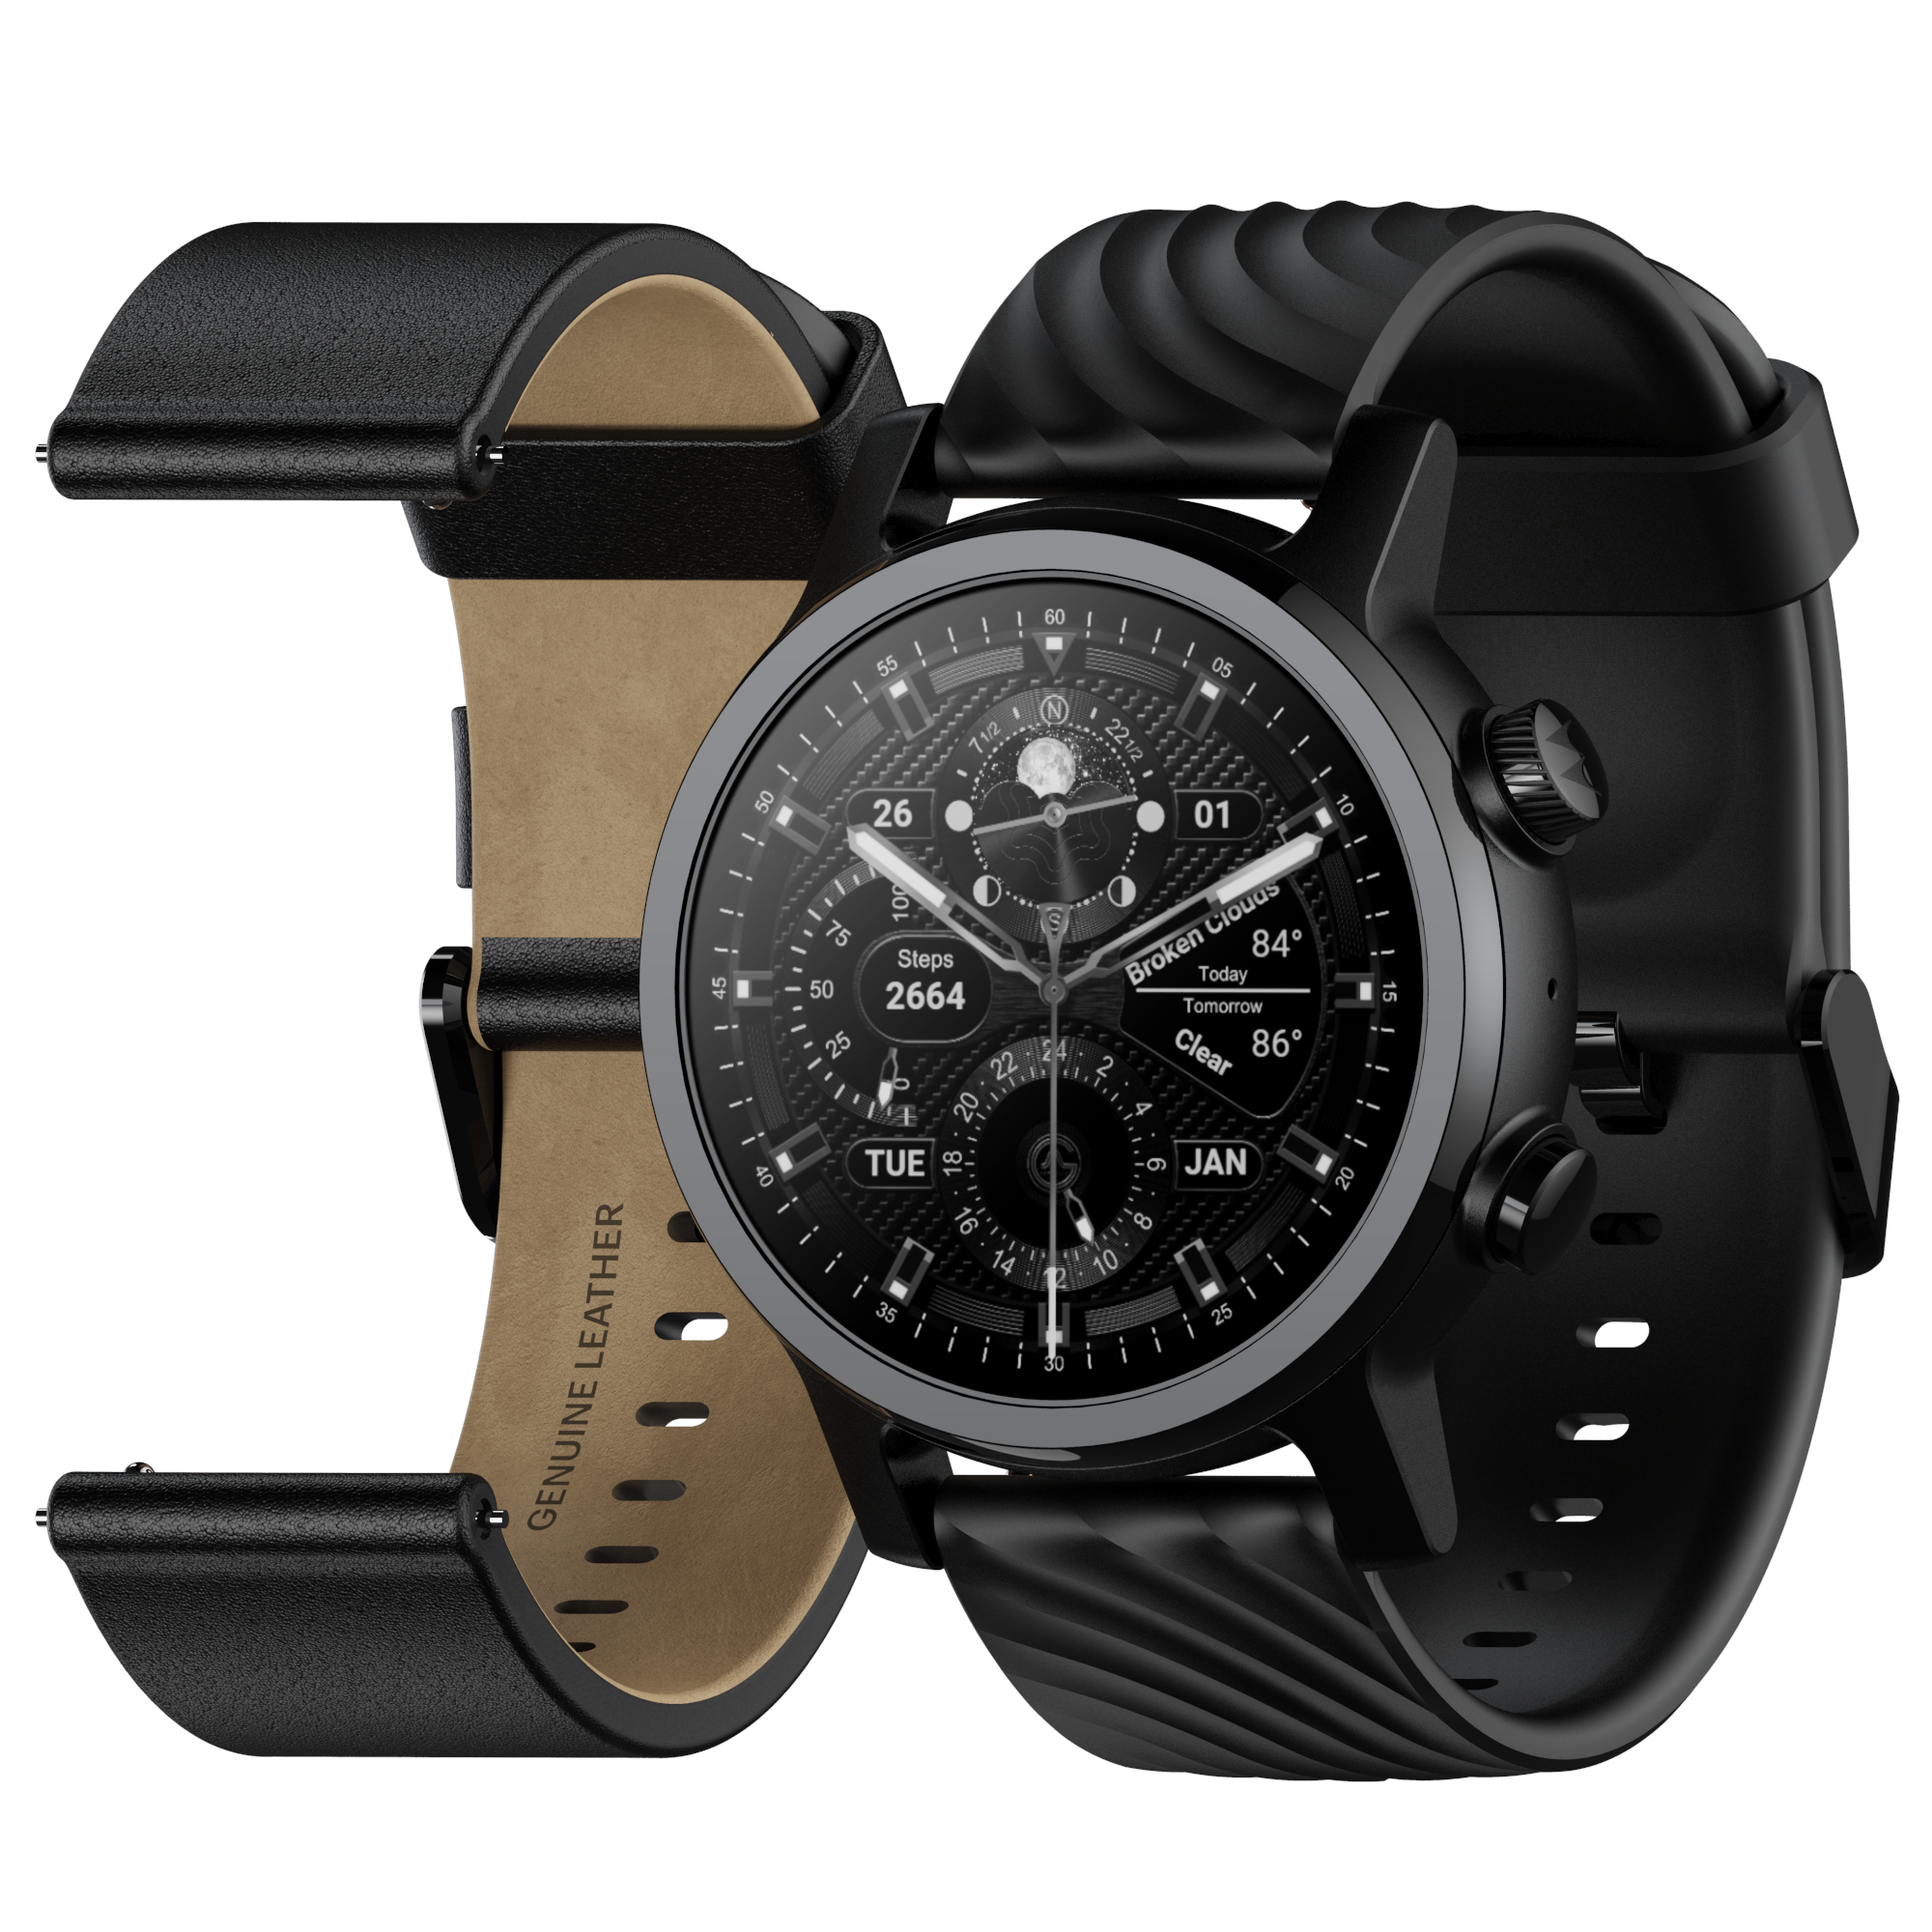 Moto 360 3rd Gen 2020 - Wear OS by Google - The Luxury Stainless Steel Smartwatch with Included Genuine Leather and High-Impact Sports Bands - Phantom Black - image 1 of 7